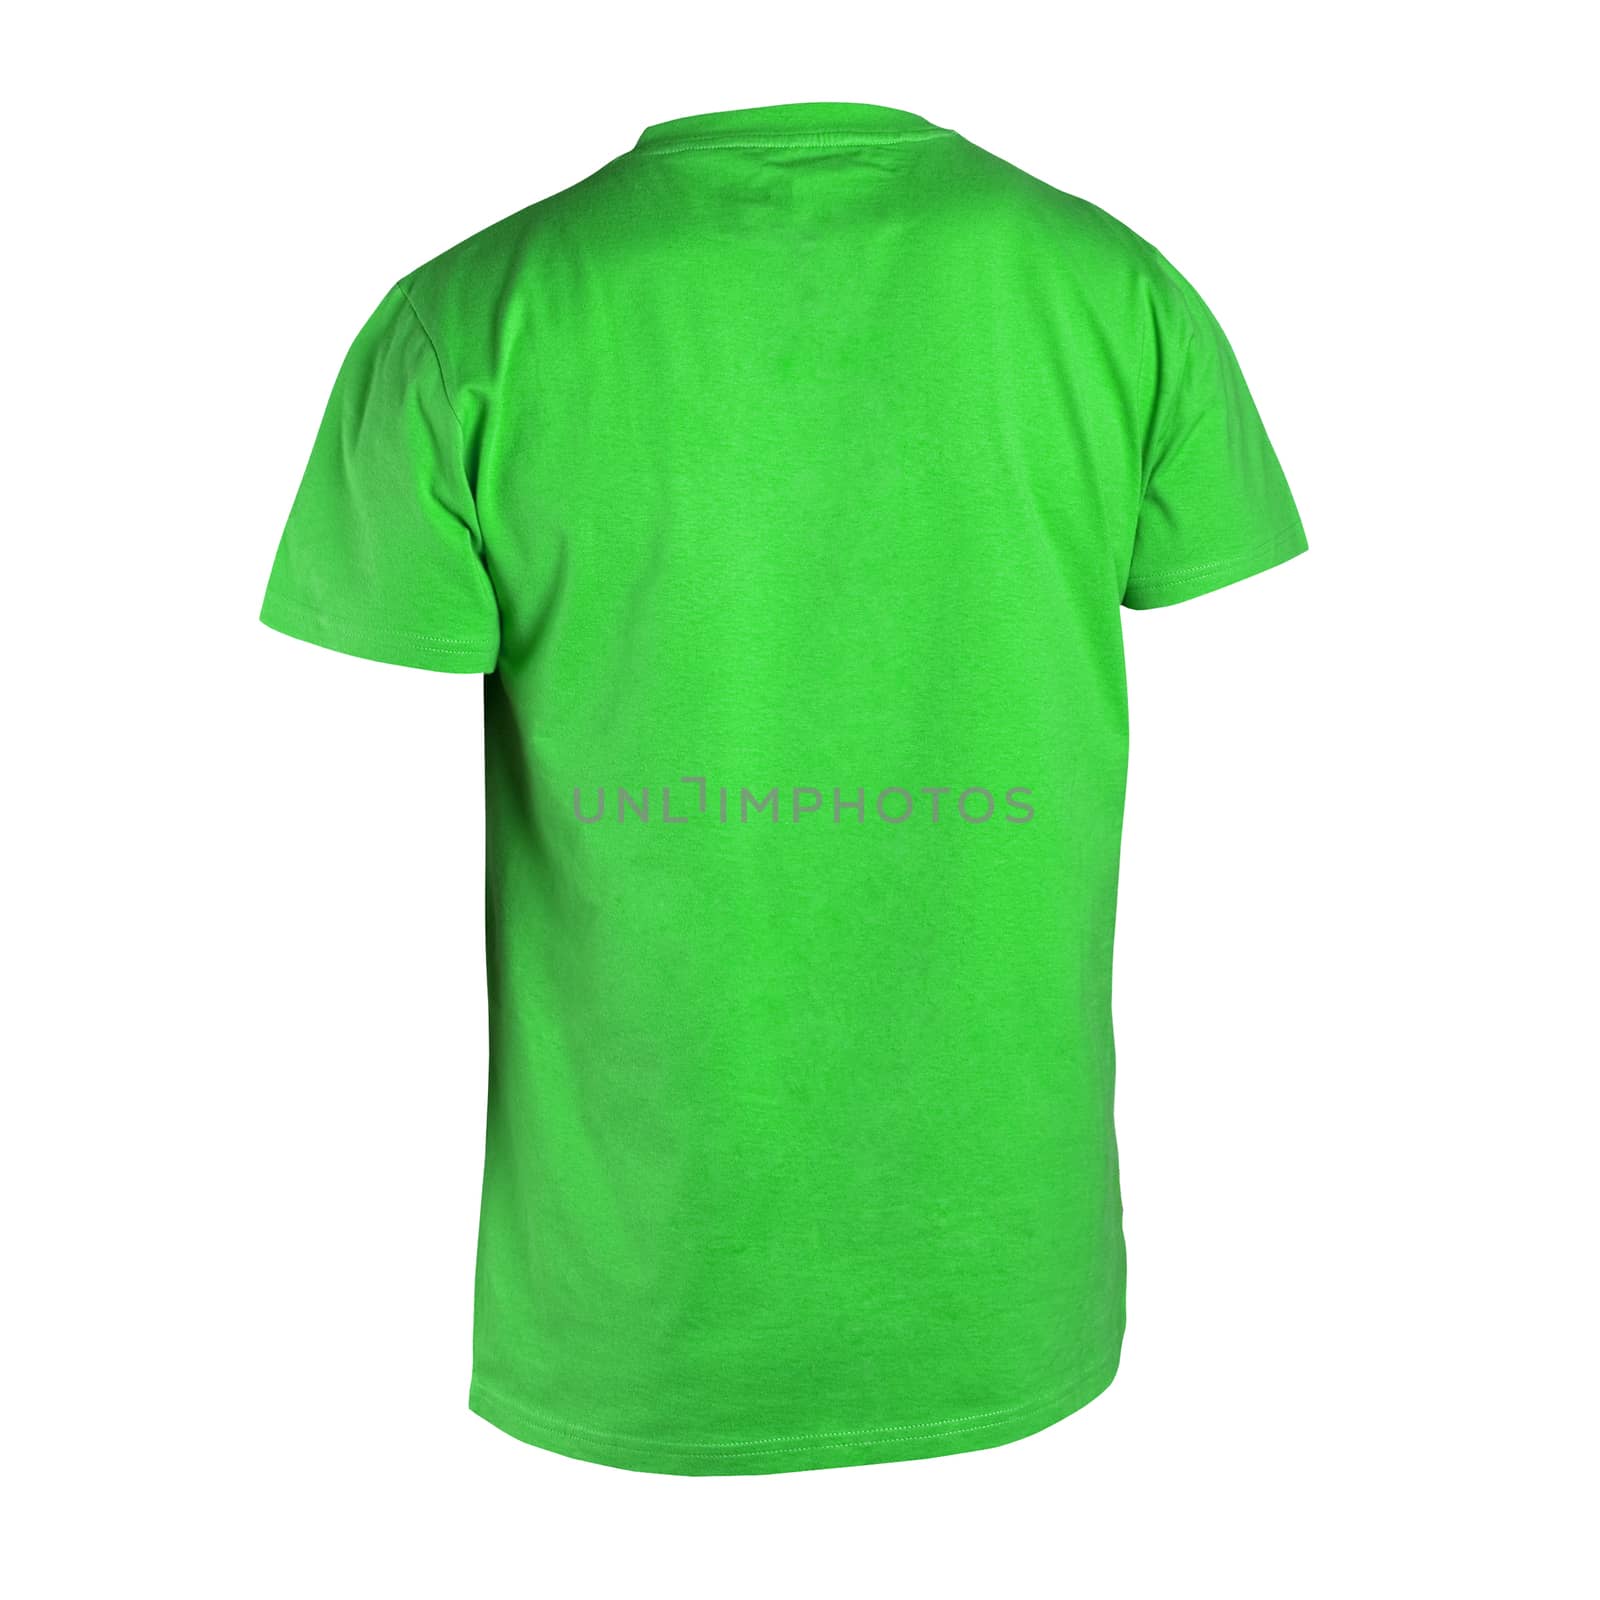 Green man t-shirt isolated on white background closeup